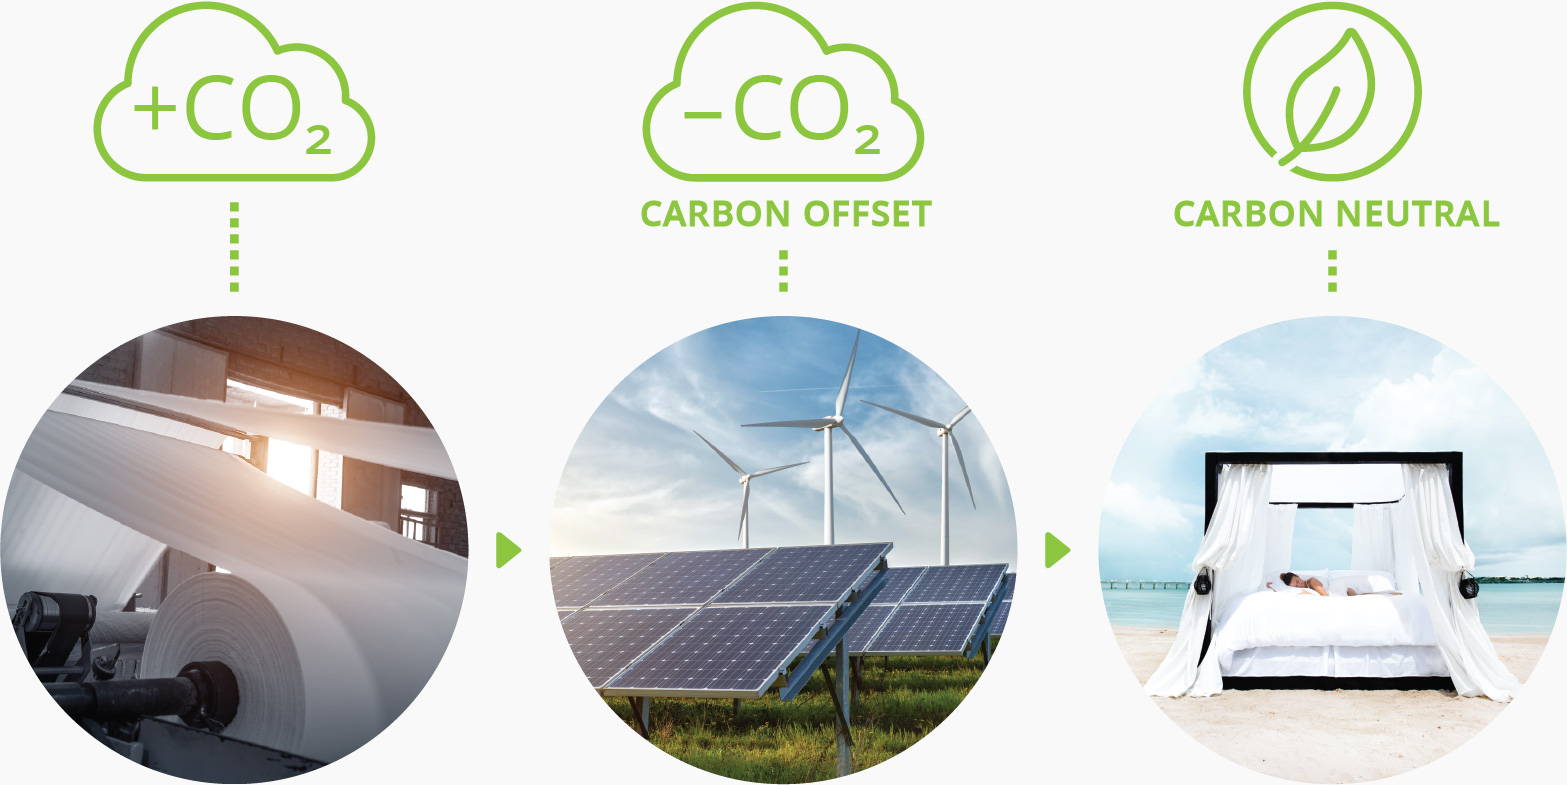 Carbon offset infographic. CO2 produced, Carbon offset projects, equals carbon neutral